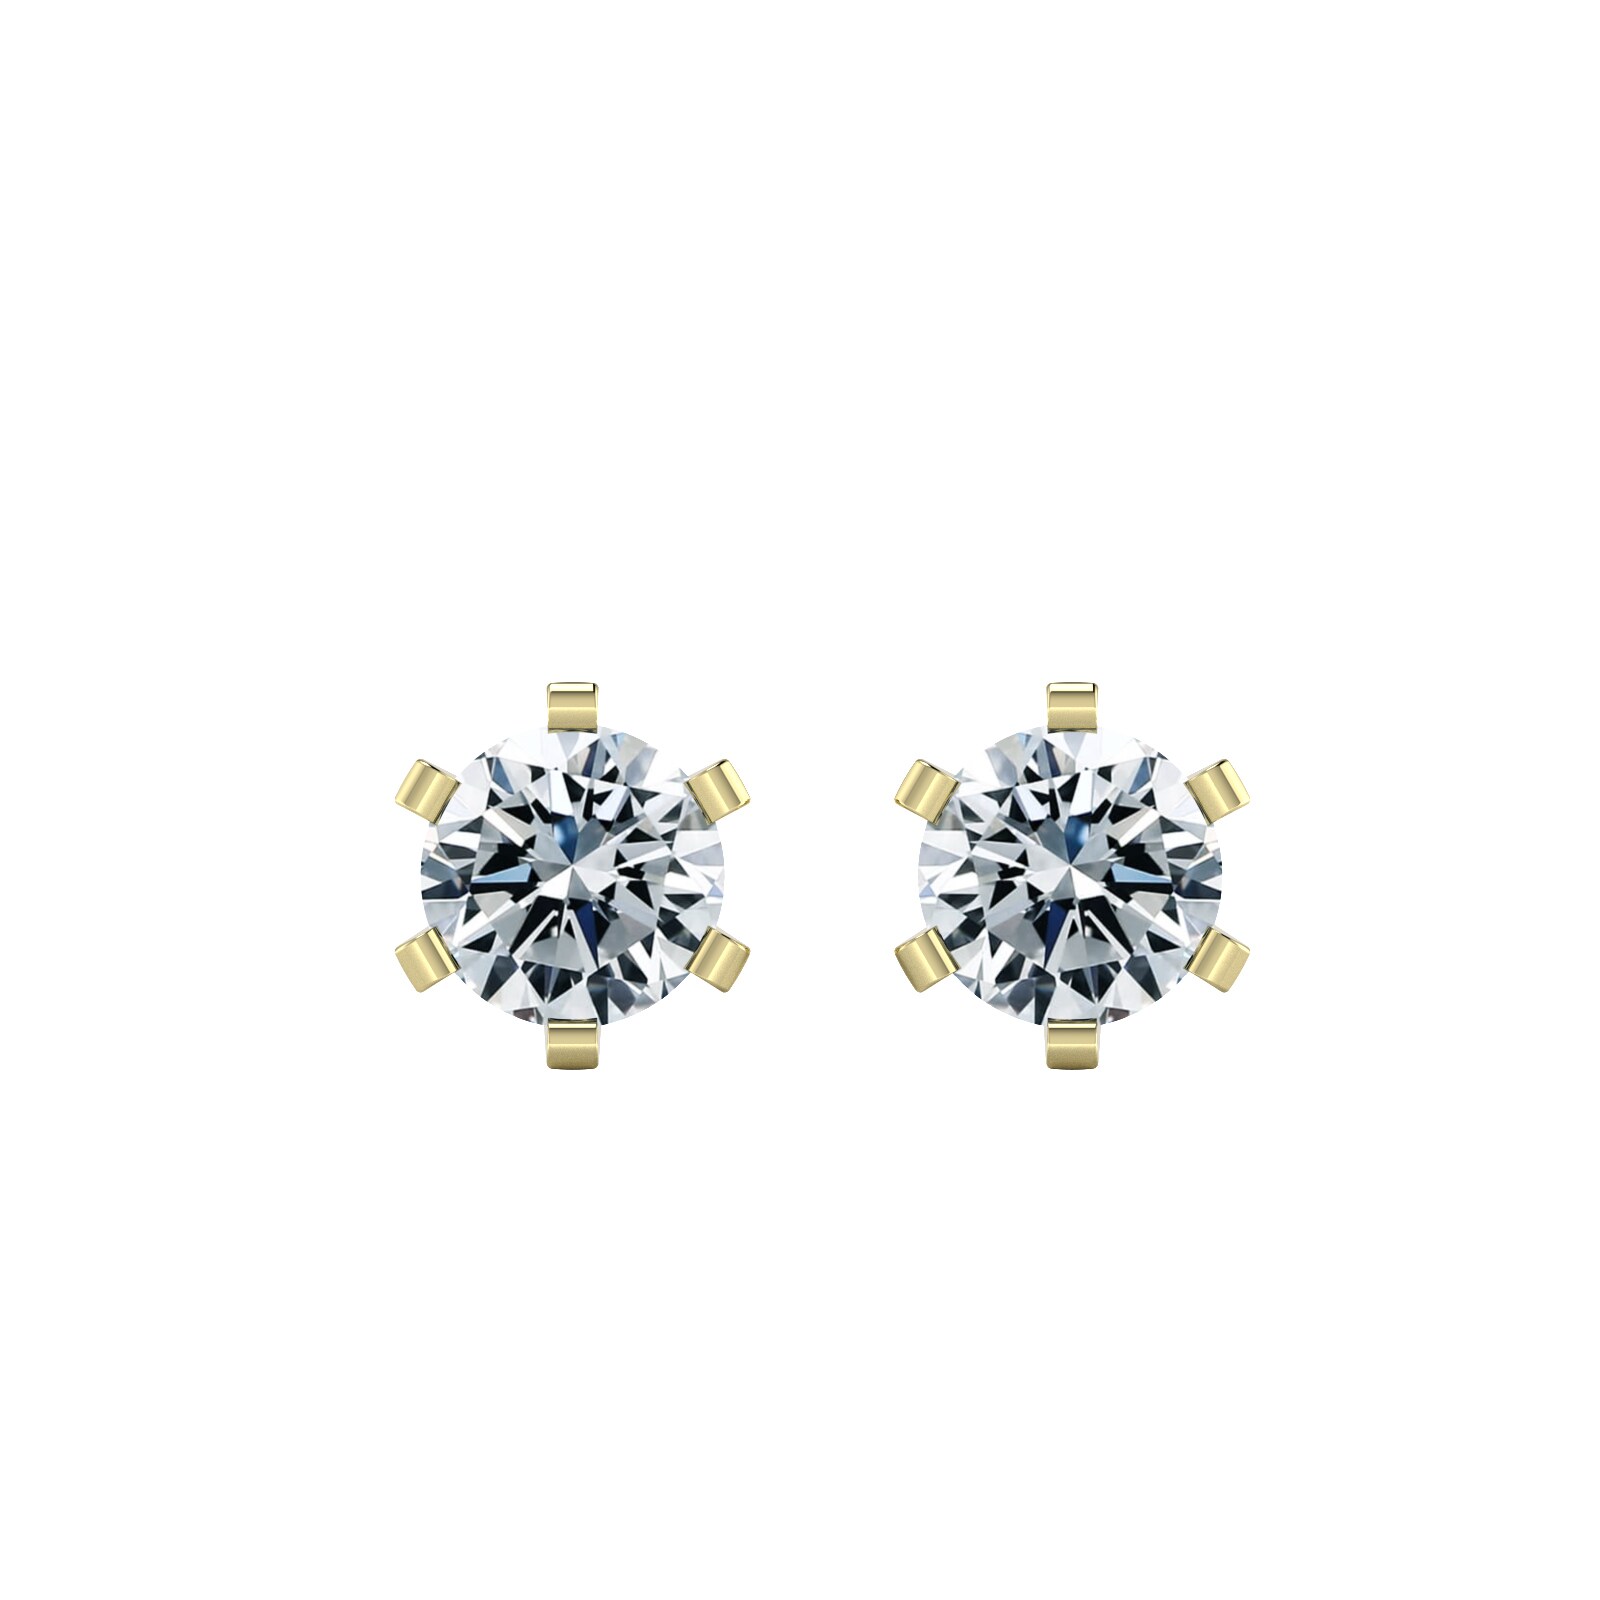 18ct Yellow Gold 0.80cttw Solitaire Diamond Stud Earrings